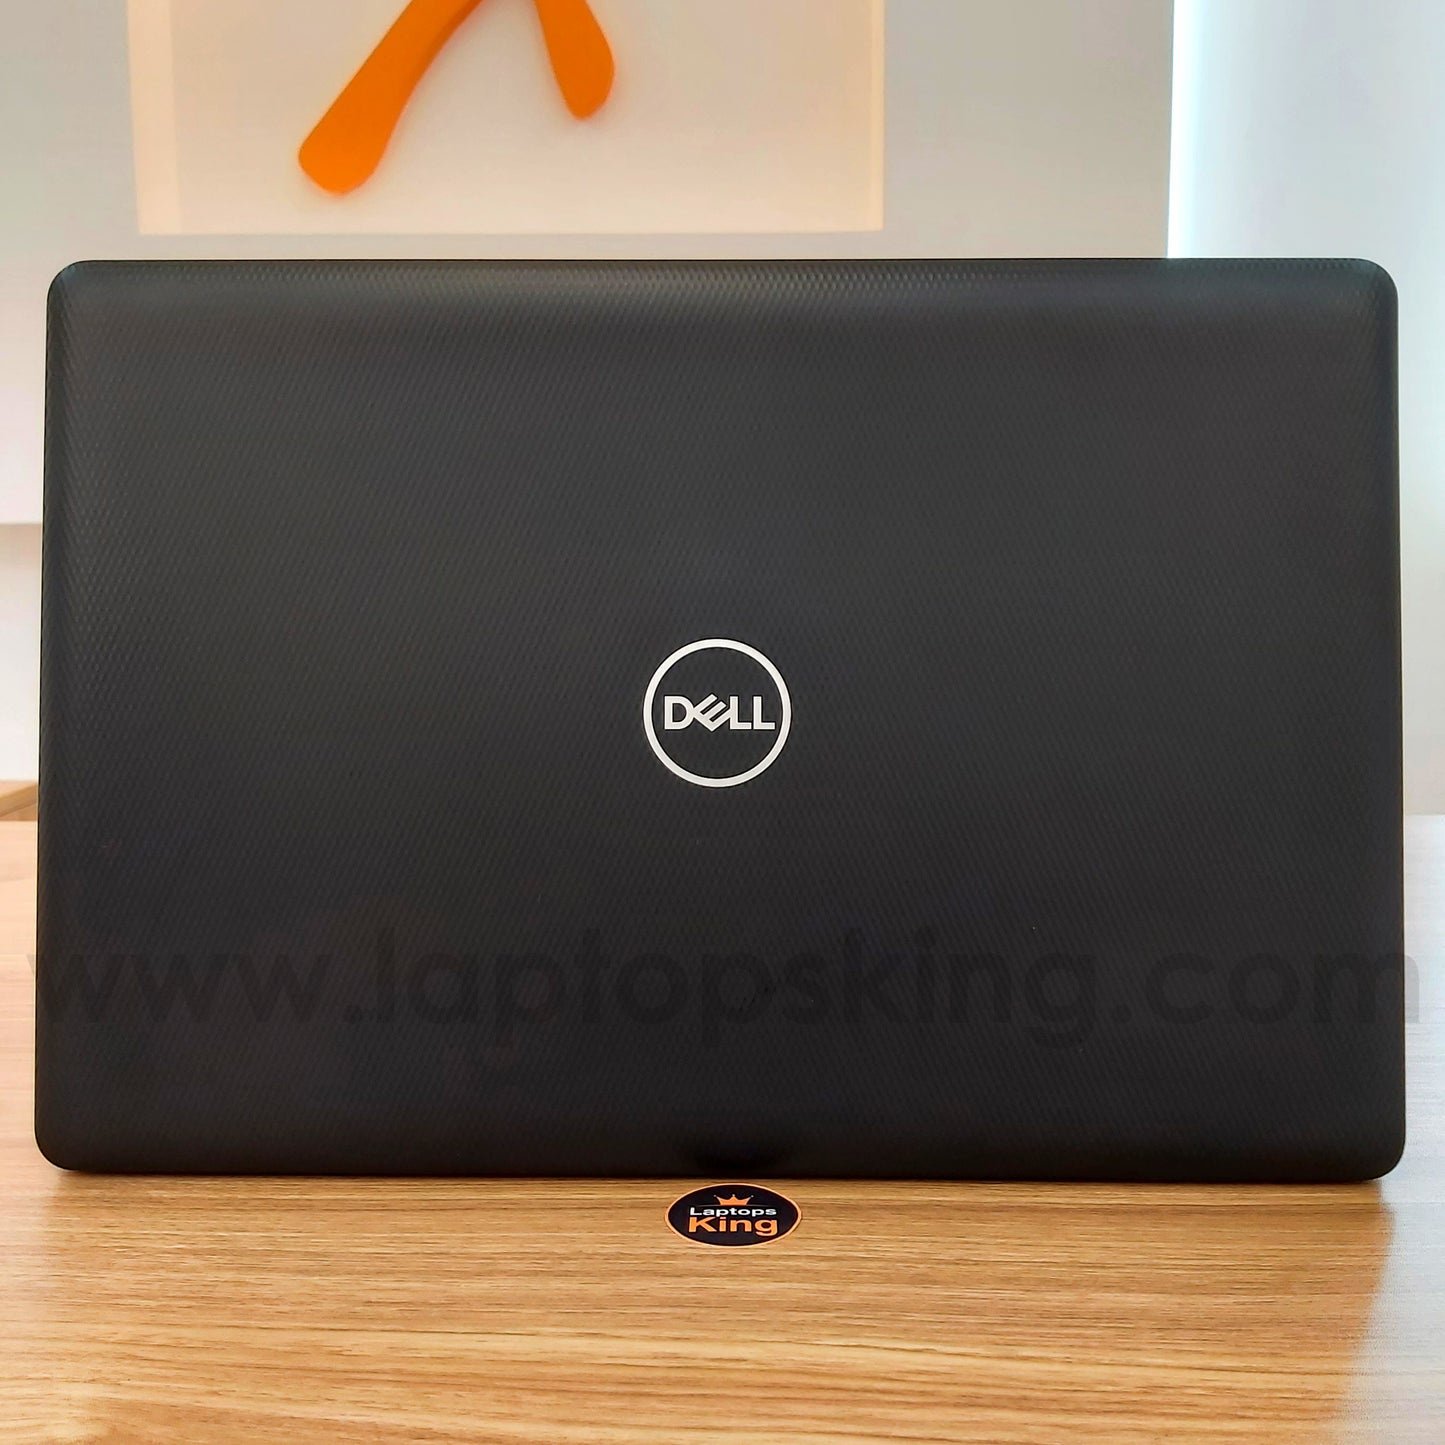 Dell Inspiron 3793 i7-1065g7 17.3" Iris Plus Up To 8gb Laptop Offers (Open Box)